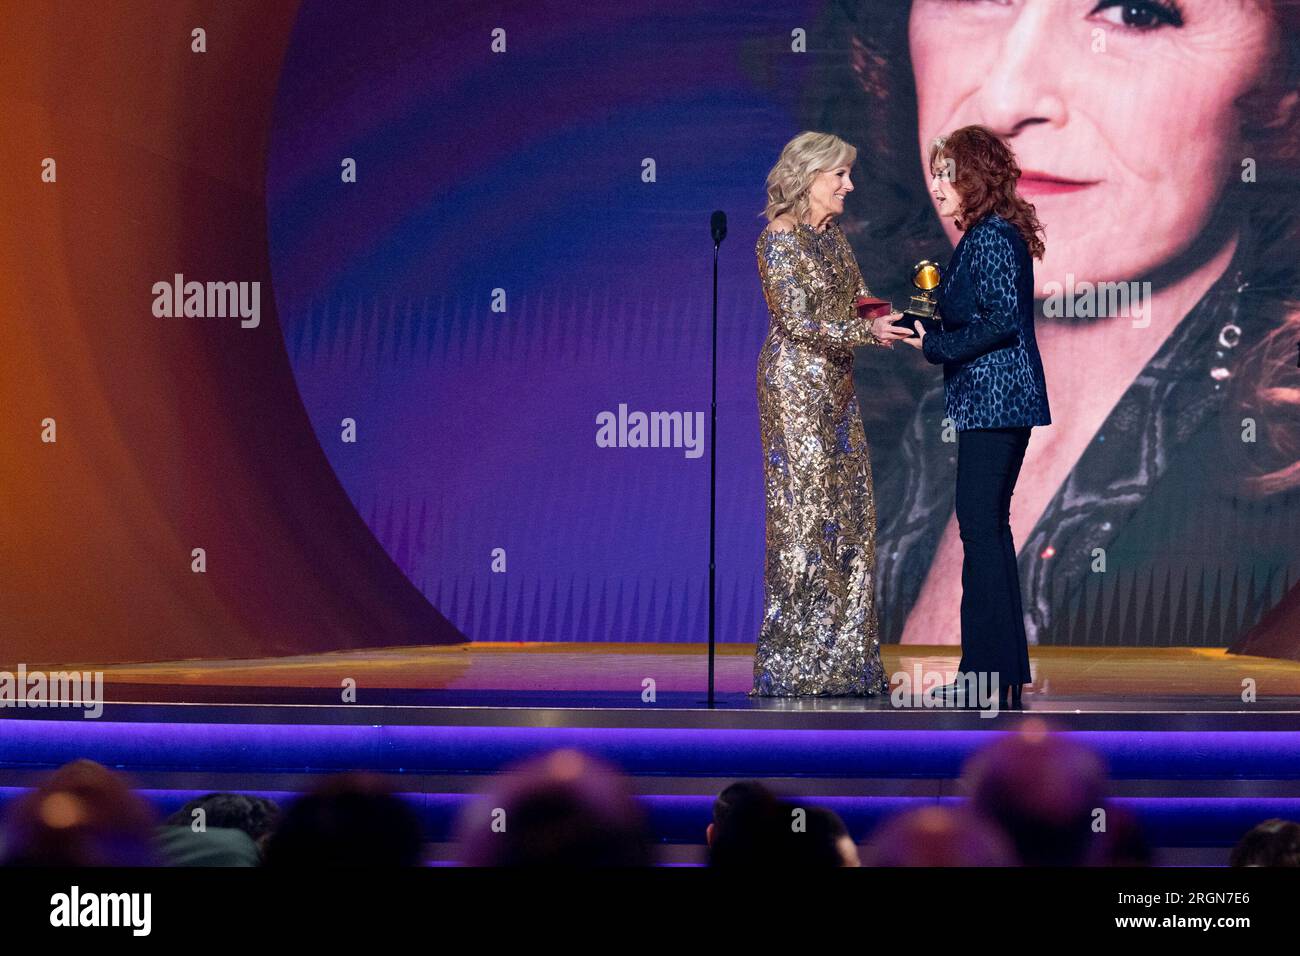 Reportage: First Lady Jill Biden presents Song of the Year to Bonnie Raitt at the Grammy Awards, Sunday, February 5, 2023, at the Crypto.com Arena in Los Angeles. Stock Photo